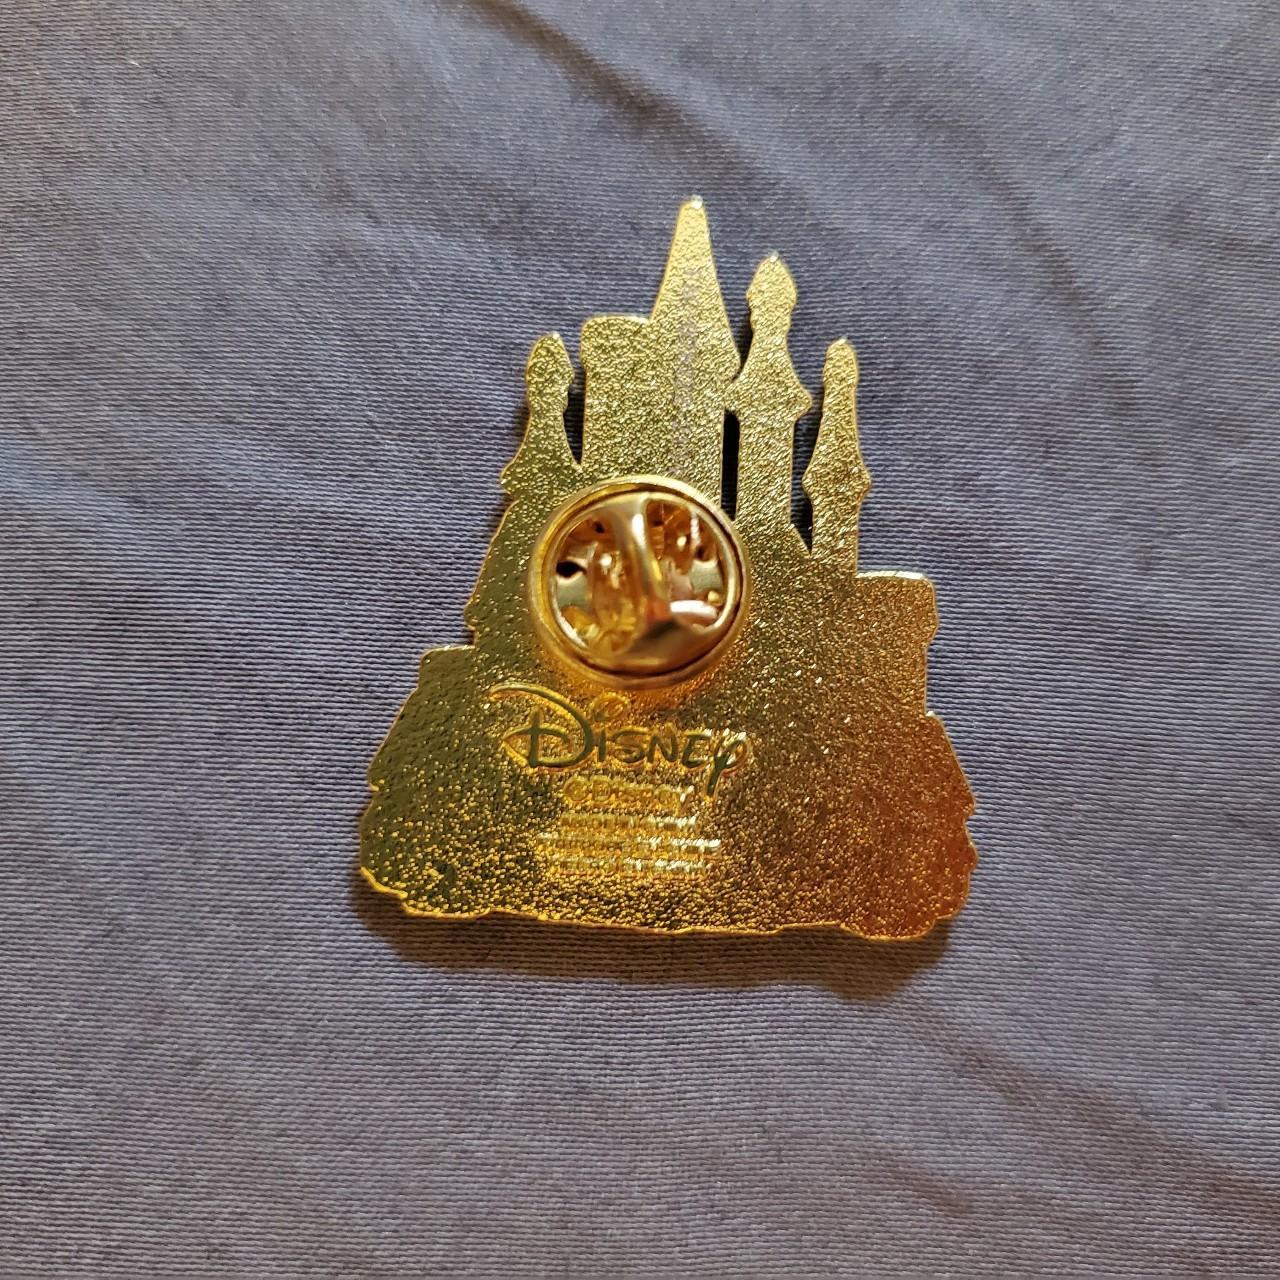 Product Image 2 - Disney Frozen Castle pin from